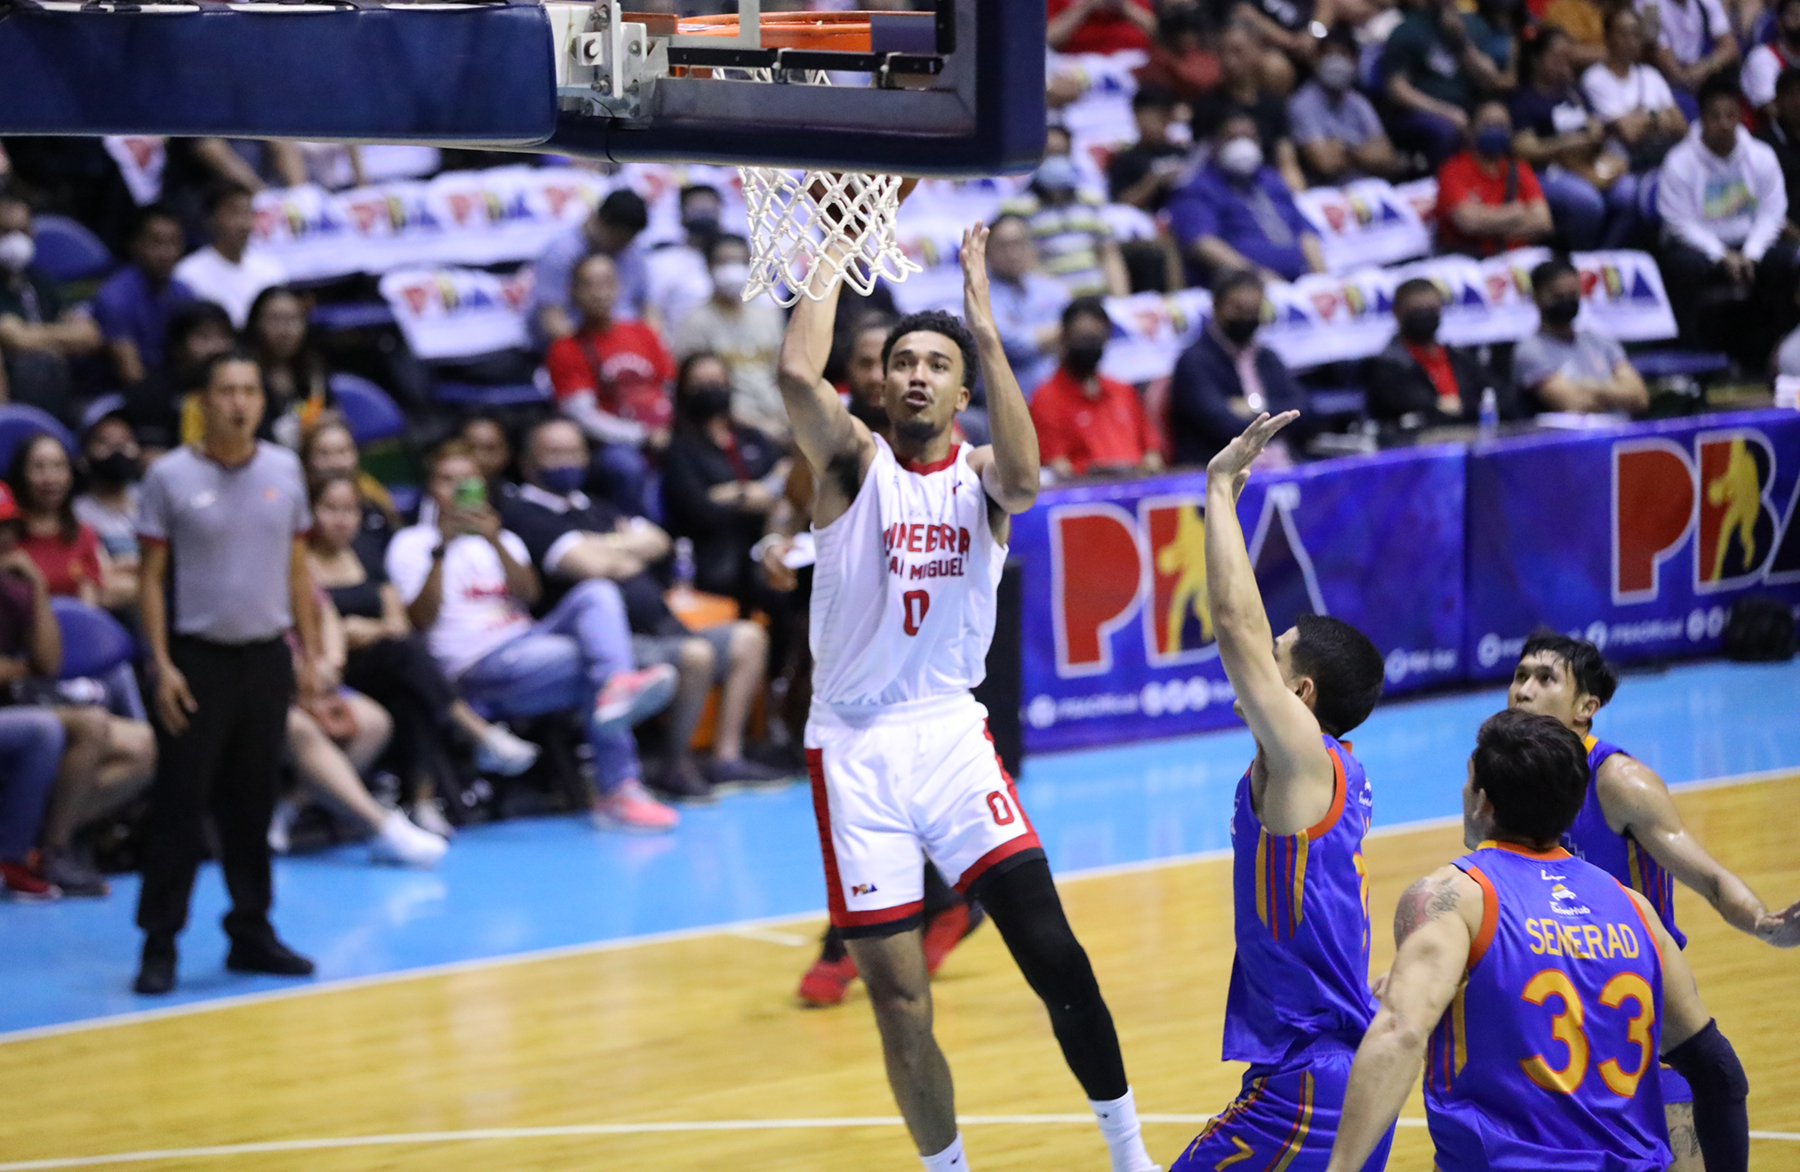 Ginebra's Jeremiah Gray delivers for the Gin Kings in the latest win. –PBA IMAGES